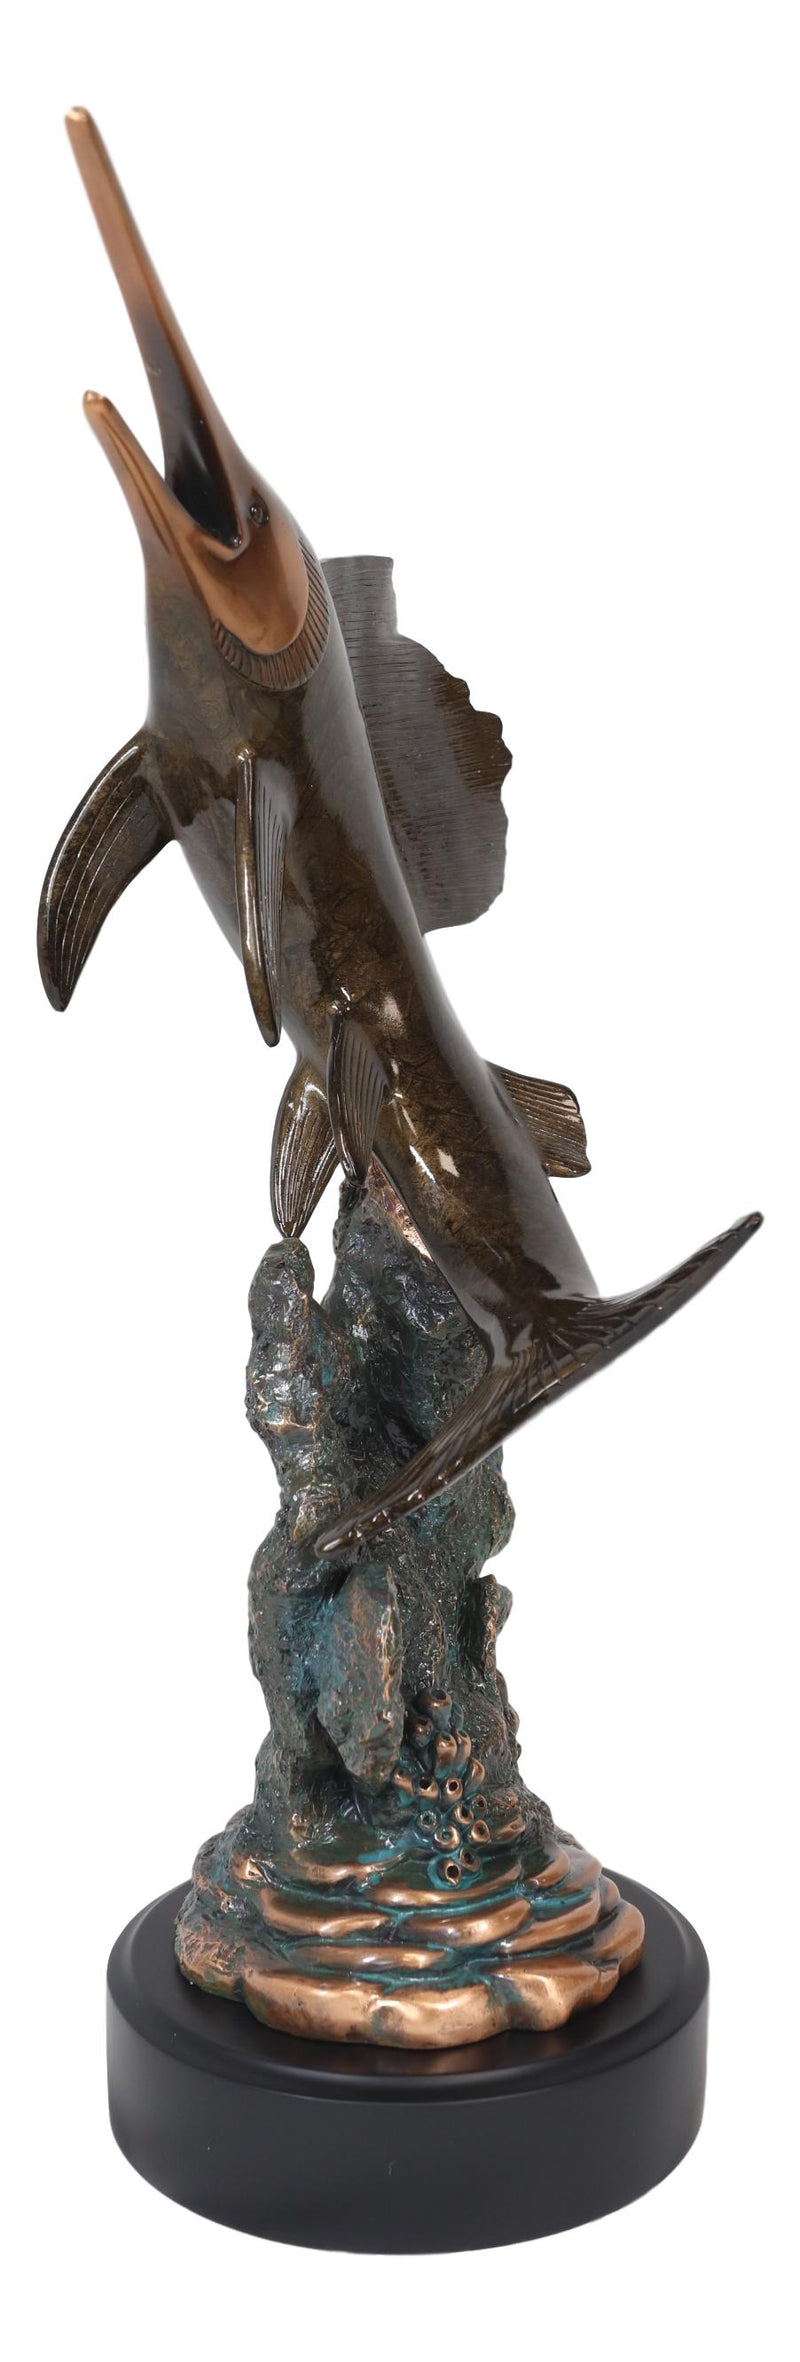 Ebros Large Nautical Marine Sailfish By Coral Reef Electroplated Bronze Statue